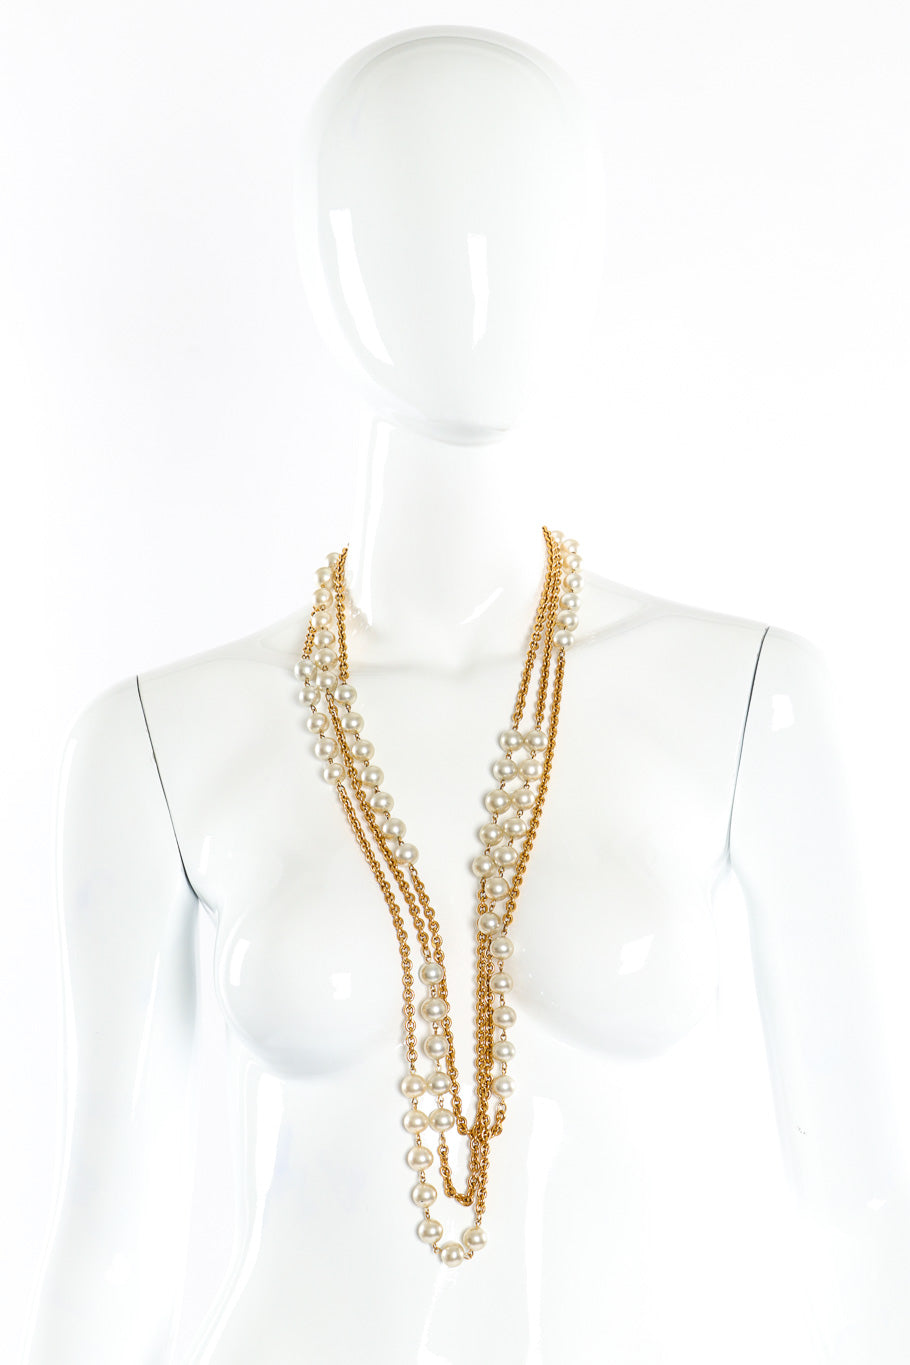 Chanel Vintage 13 Strand Layered Pearl & Ball Chain Necklace